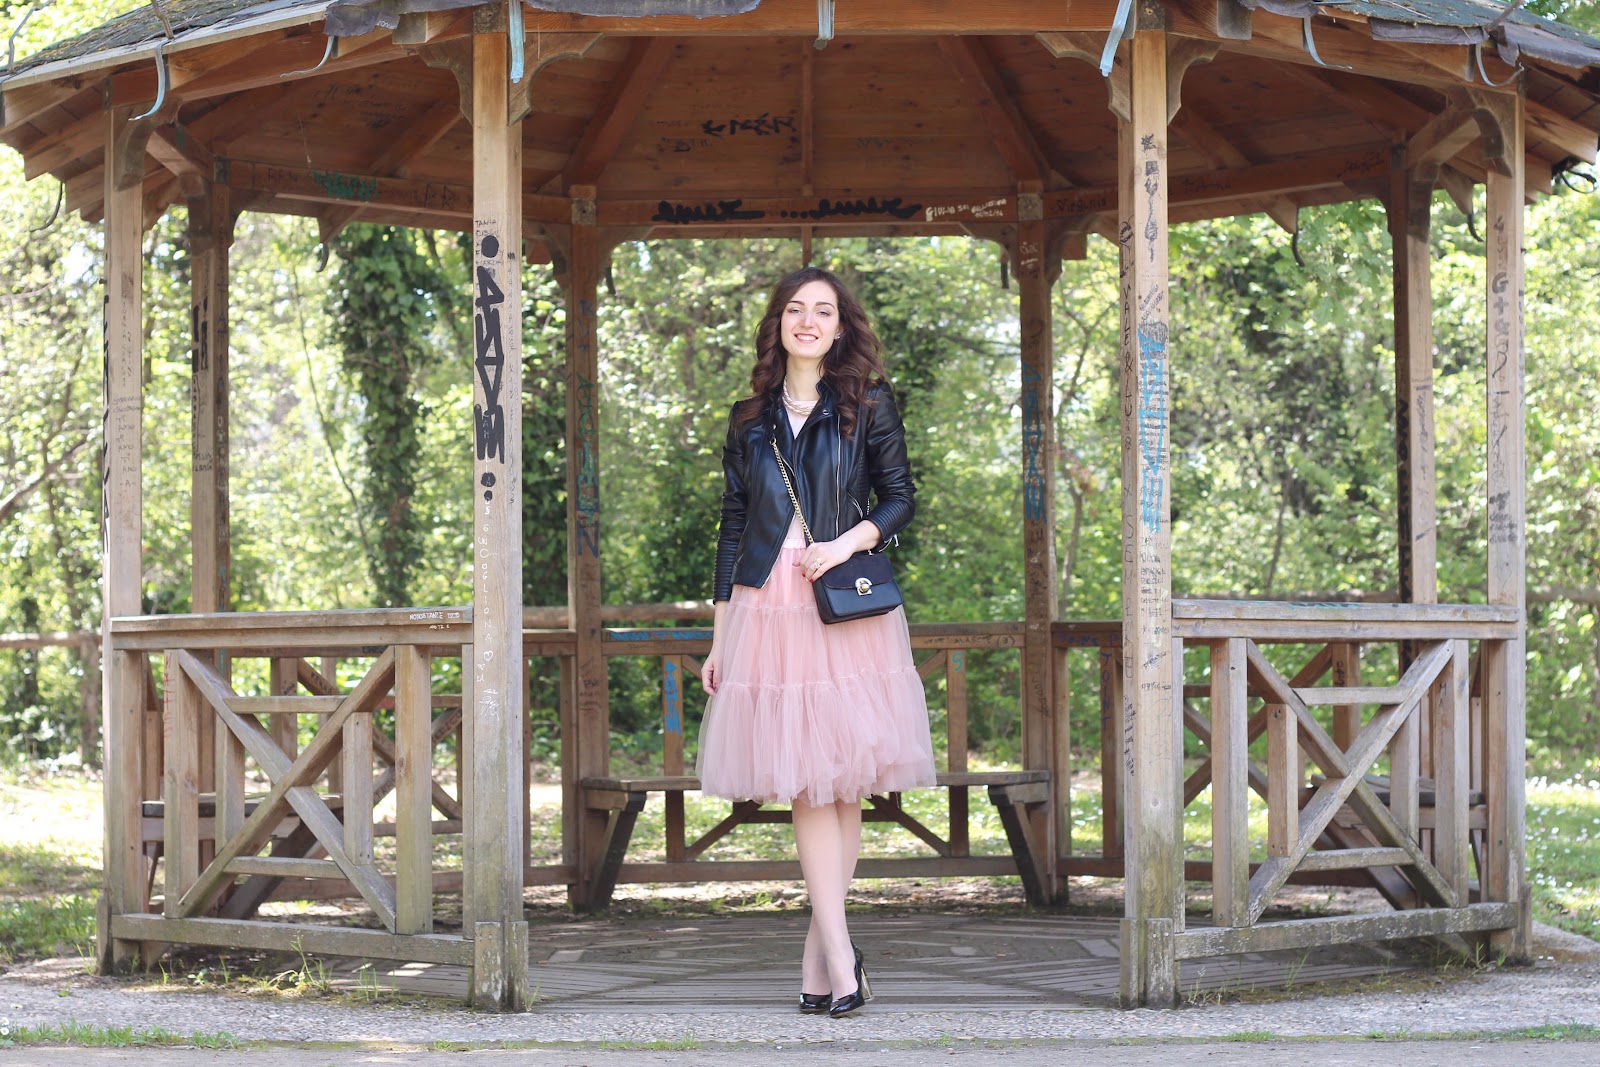 fashion style blogger italian girl italy ootd outfit vogue glamour pescara tulle skirt gonna rosa pink chic wish collana charme bijoux necklace zara heels shoes scarpe tacchi bag borsa jacket leather giacca chiodo pelle look rock chic